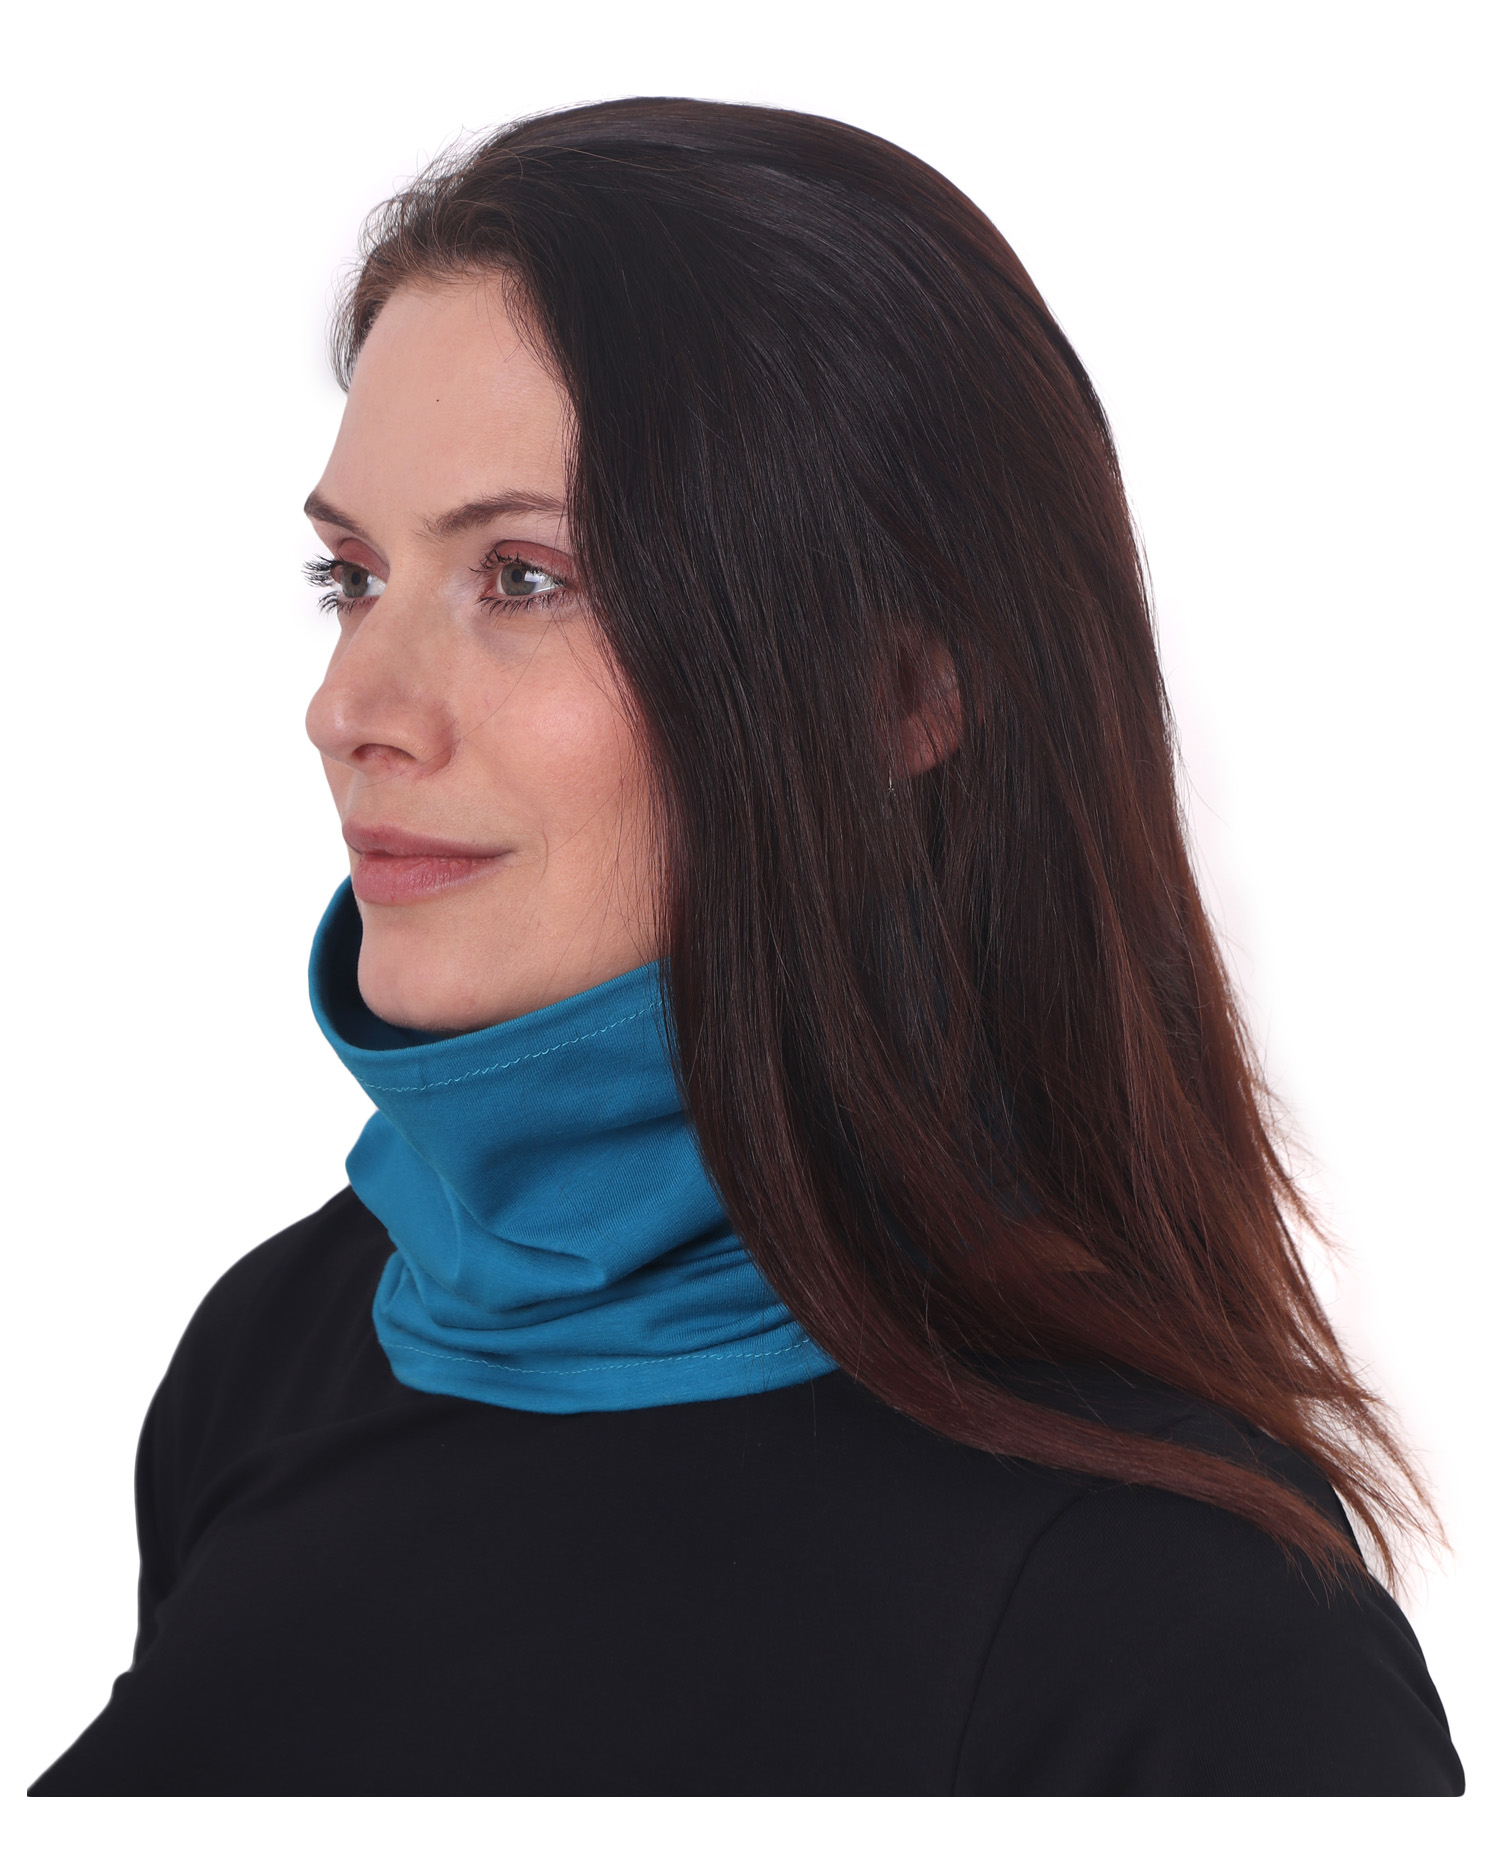 Multifunctional scarf, dark turquoise, for adults